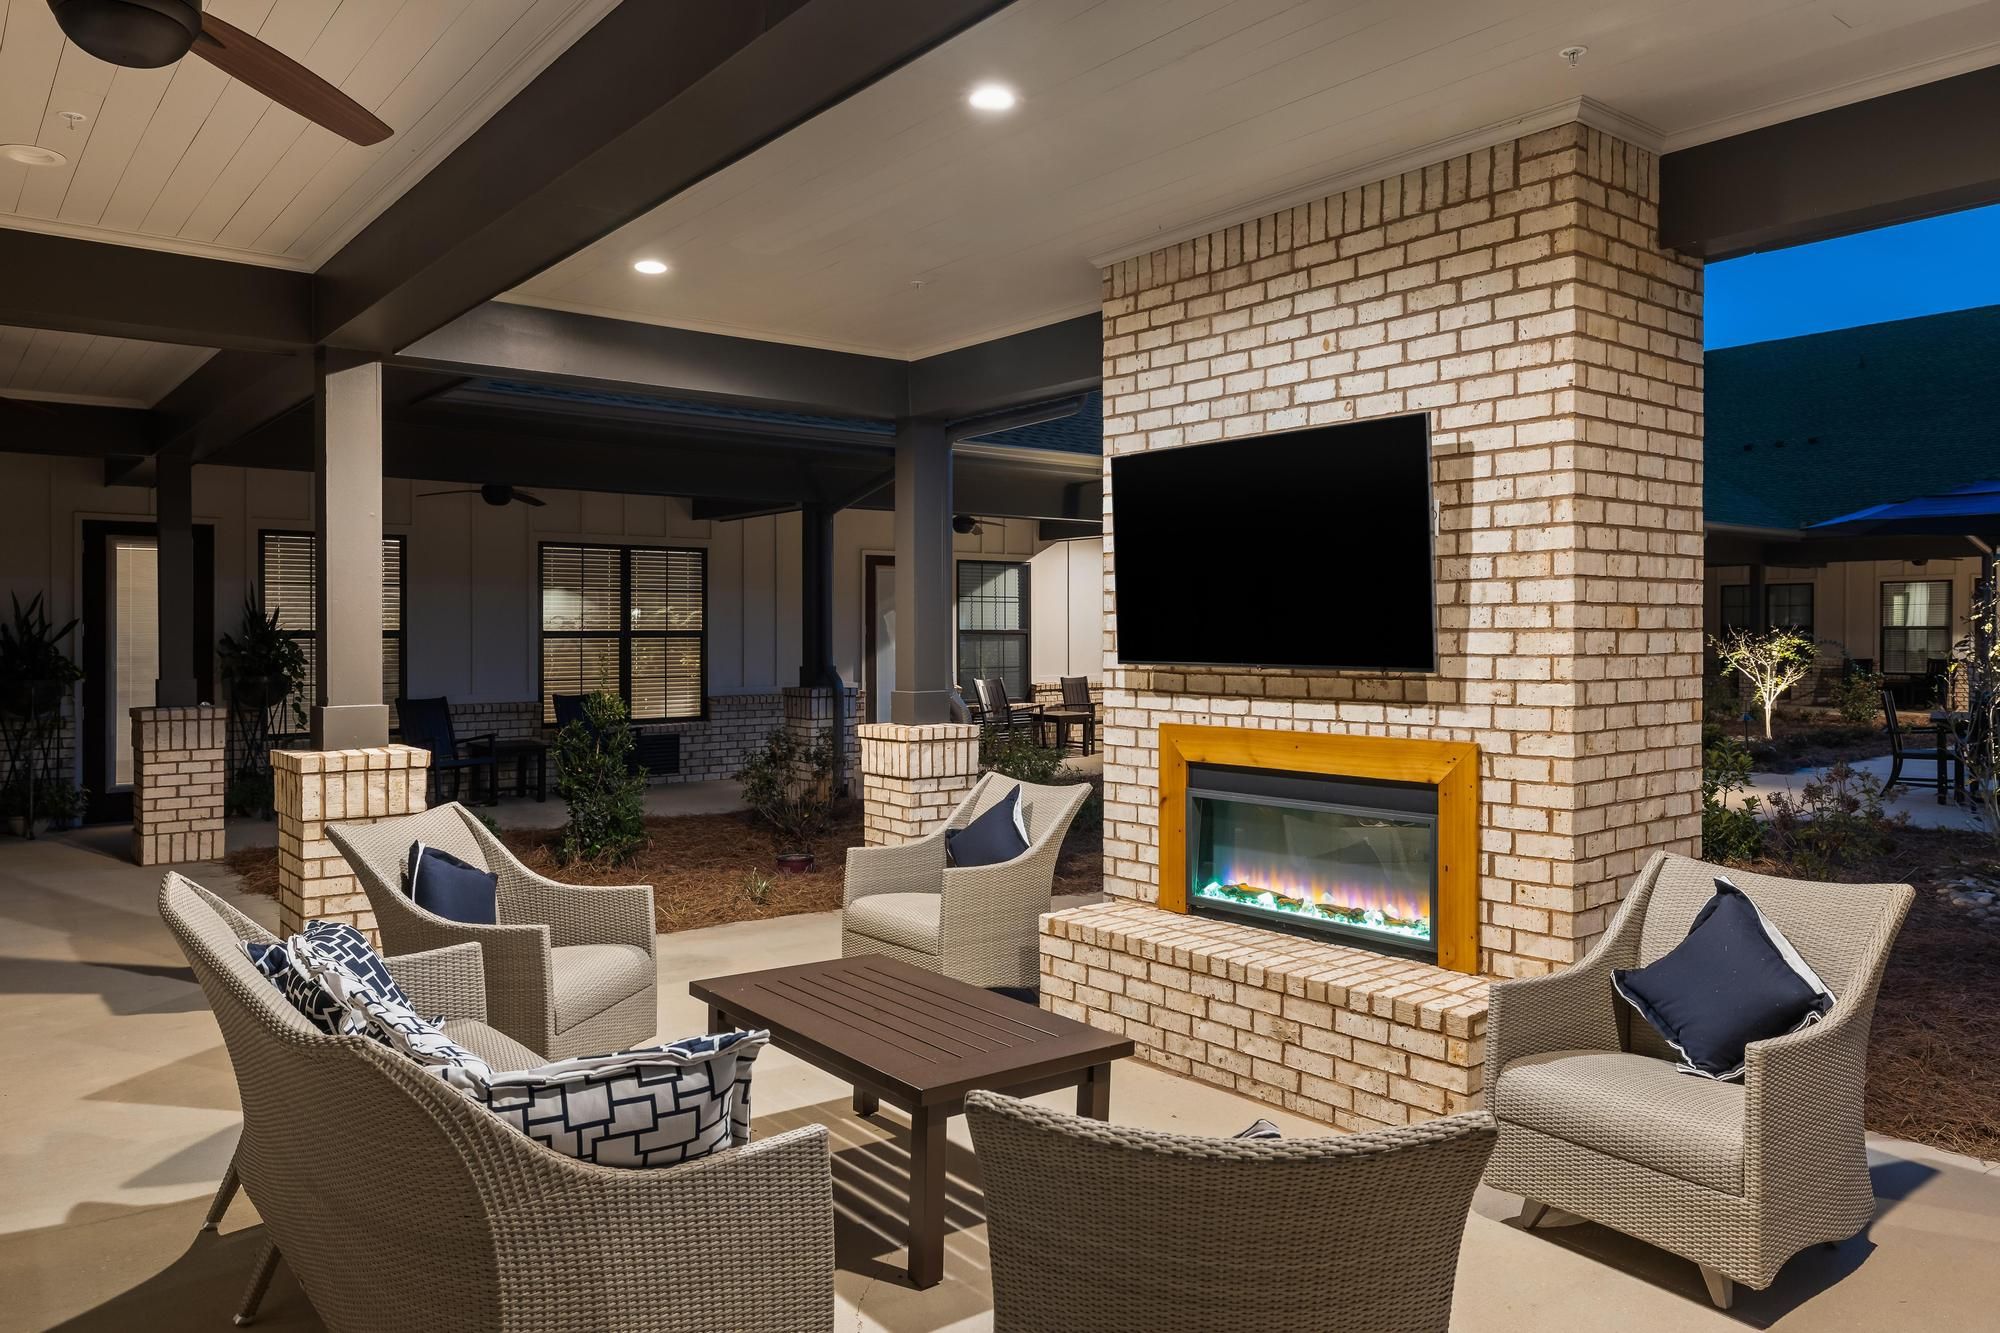 The Preserve at Meridian view of courtyard with fireplace and seating